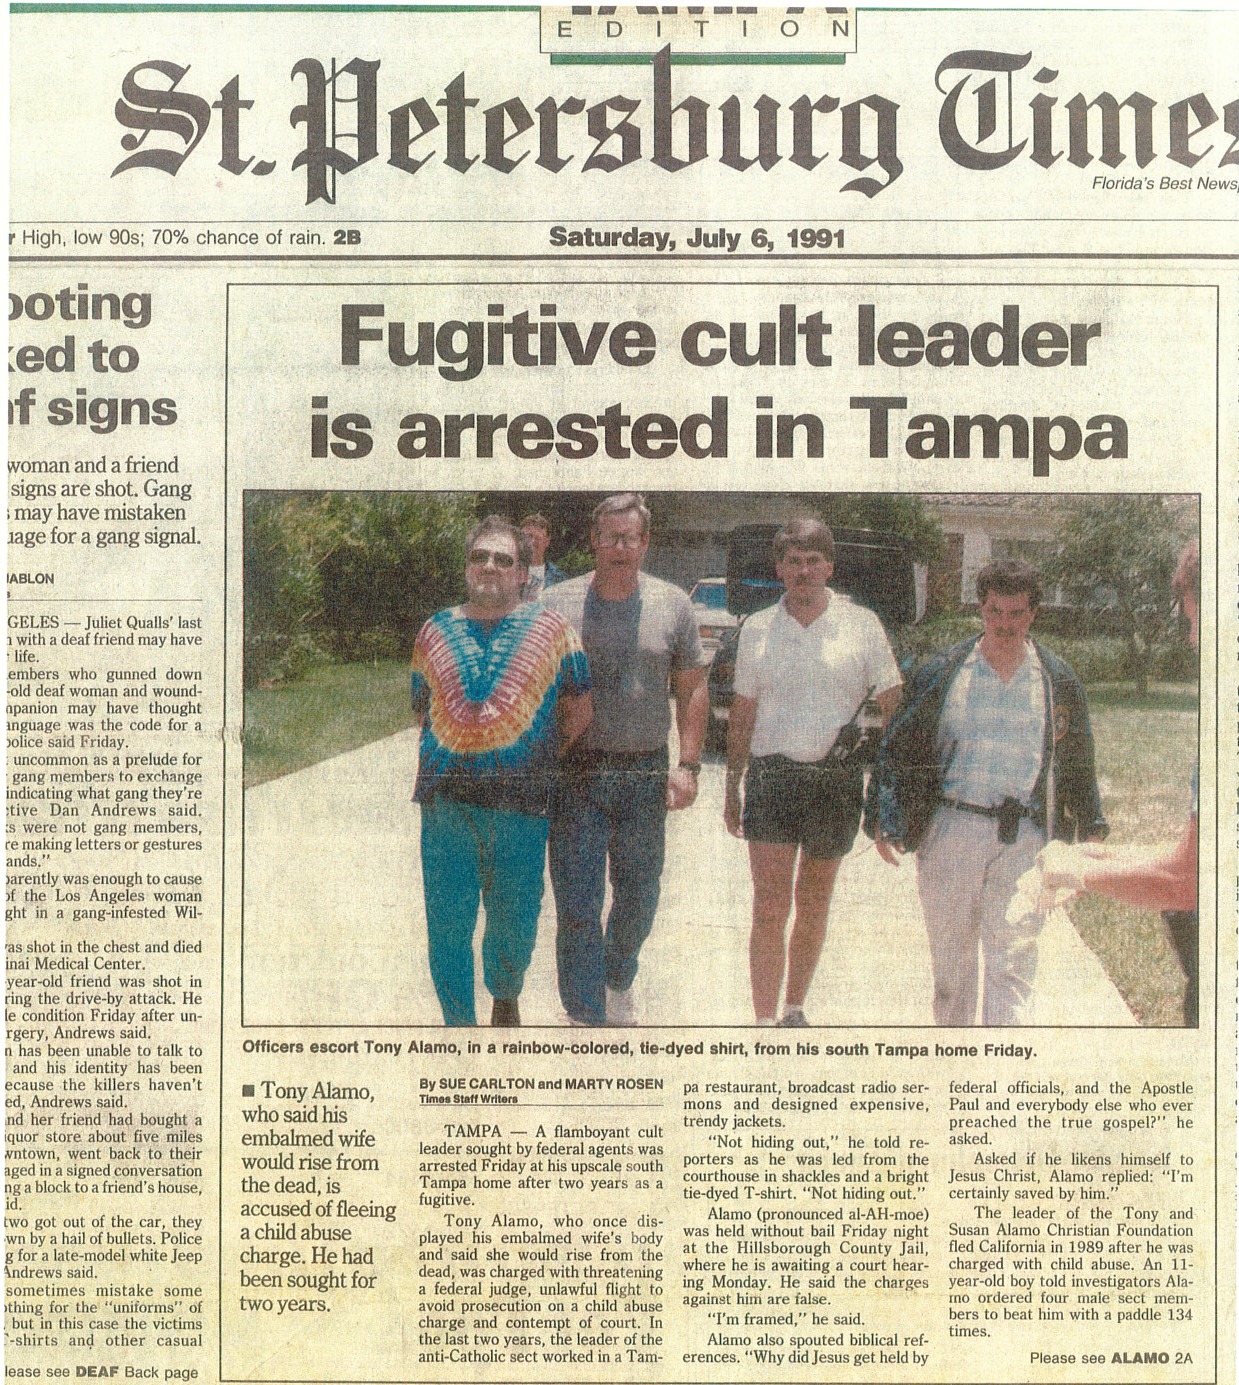 TAMPA - A flamboyant cult leader sought by federal agents was arrested Frid...